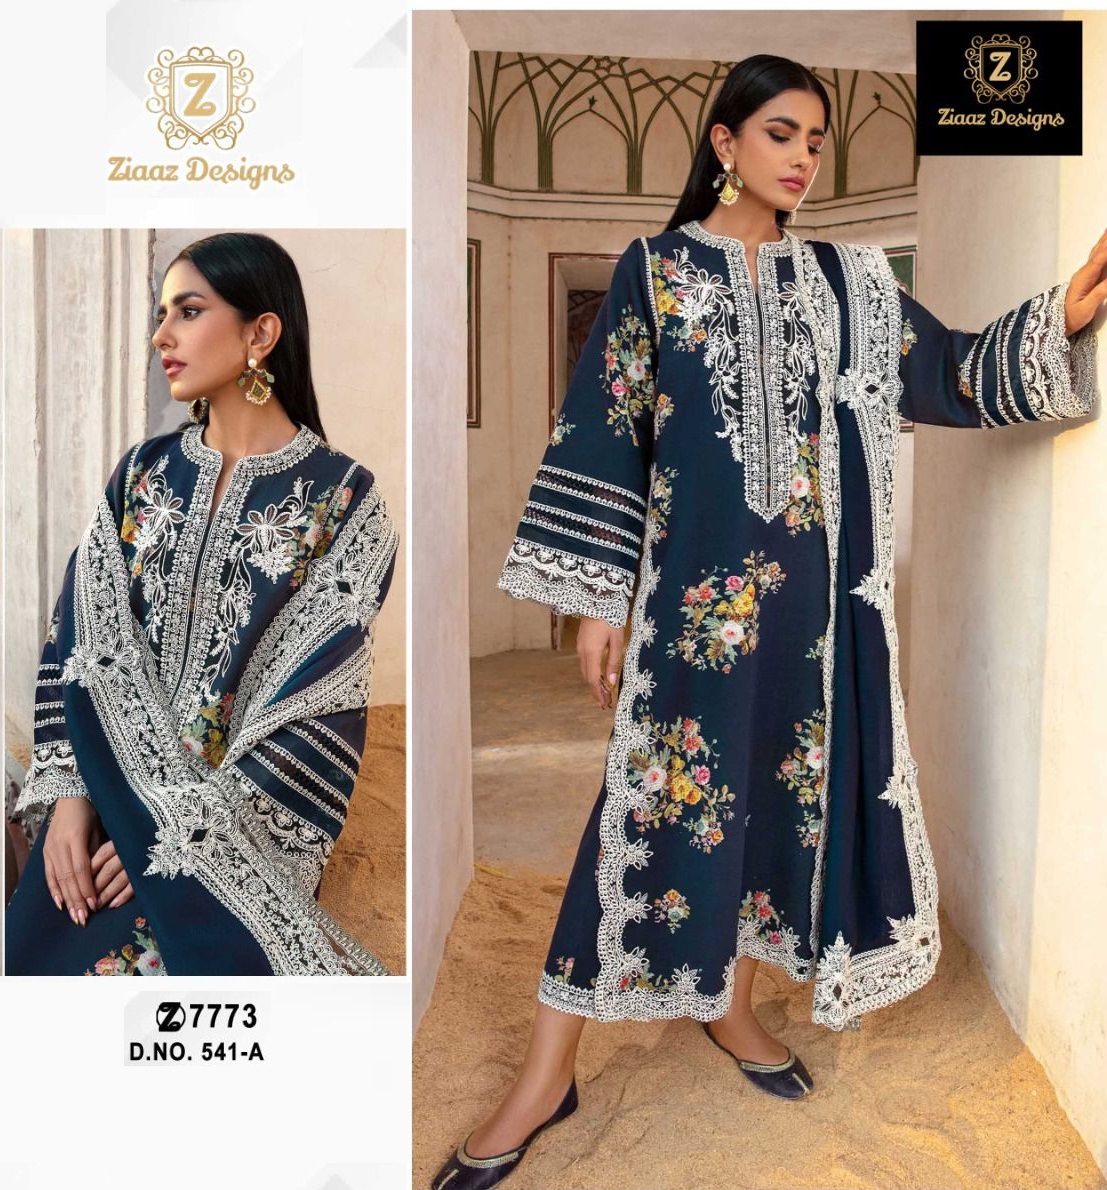 ZIAAZ DESIGNS 541 A PAKISTANI SUITS IN INDIA